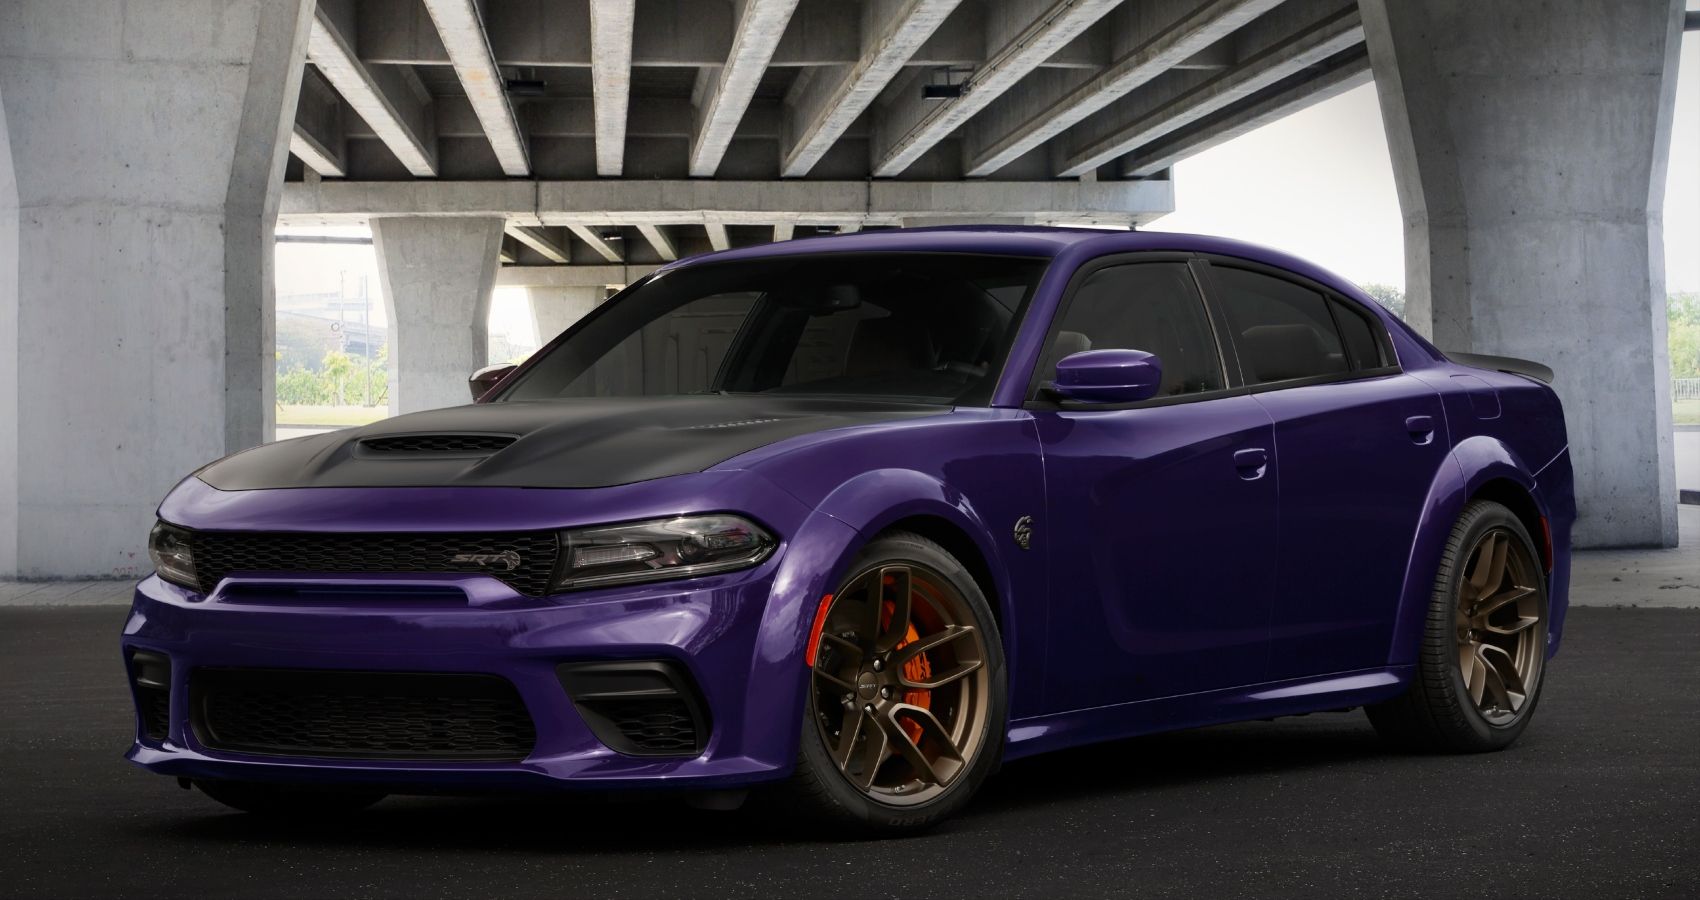 The 2023 Dodge Charger Scat Pack Widebody, shown in Plum Crazy